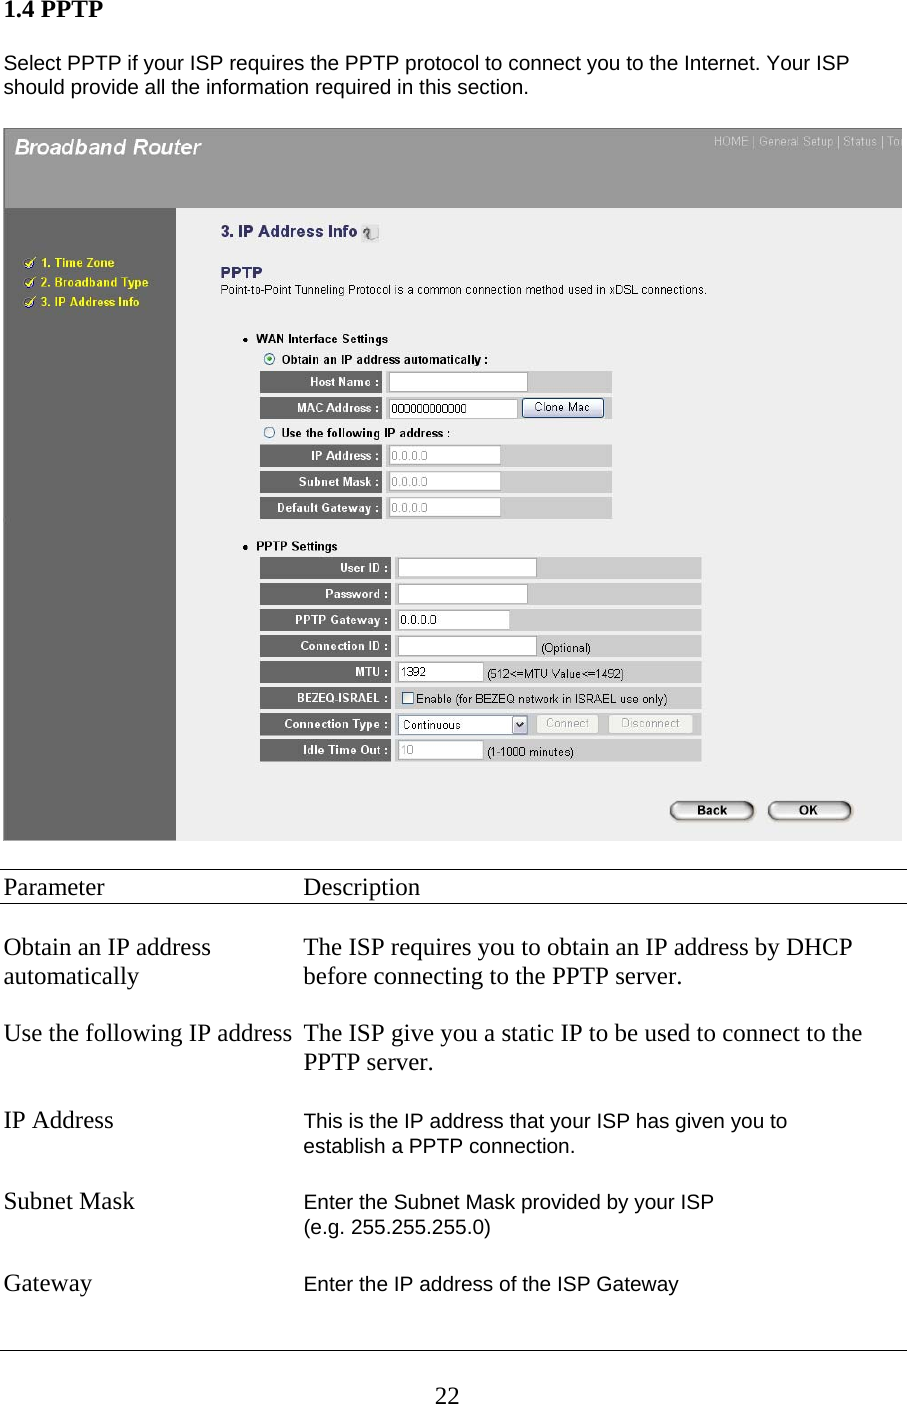 1.4 PPTP  Select PPTP if your ISP requires the PPTP protocol to connect you to the Internet. Your ISP should provide all the information required in this section.    Parameter   Description  Obtain an IP address    The ISP requires you to obtain an IP address by DHCP automatically      before connecting to the PPTP server.  Use the following IP address  The ISP give you a static IP to be used to connect to the      PPTP server.  IP Address      This is the IP address that your ISP has given you to    establish a PPTP connection.   Subnet Mask      Enter the Subnet Mask provided by your ISP  (e.g. 255.255.255.0)  Gateway  Enter the IP address of the ISP Gateway   22